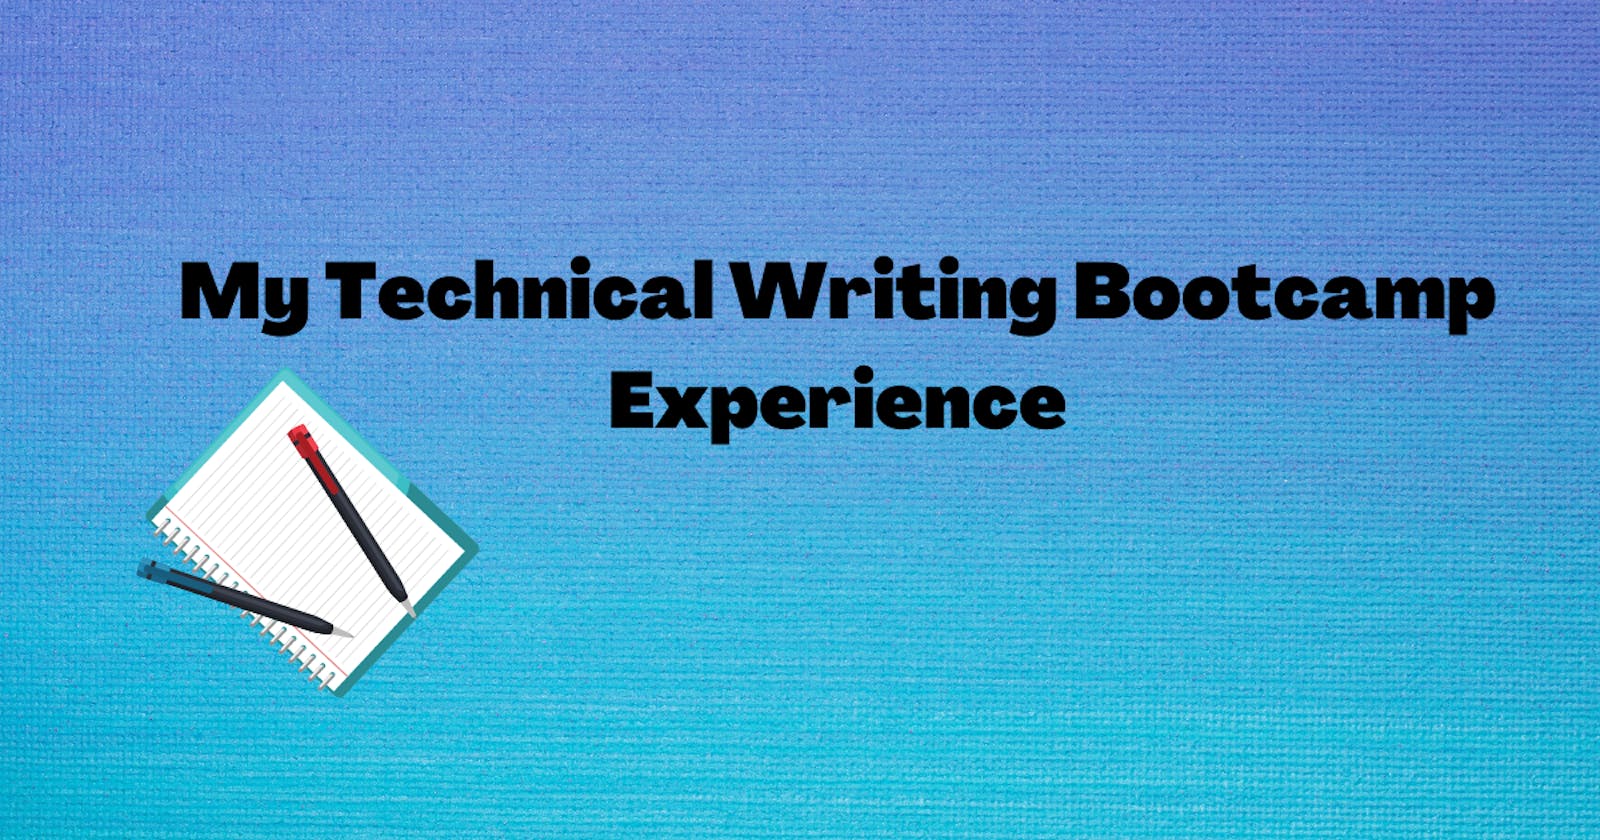 My Technical Writing Bootcamp Experience